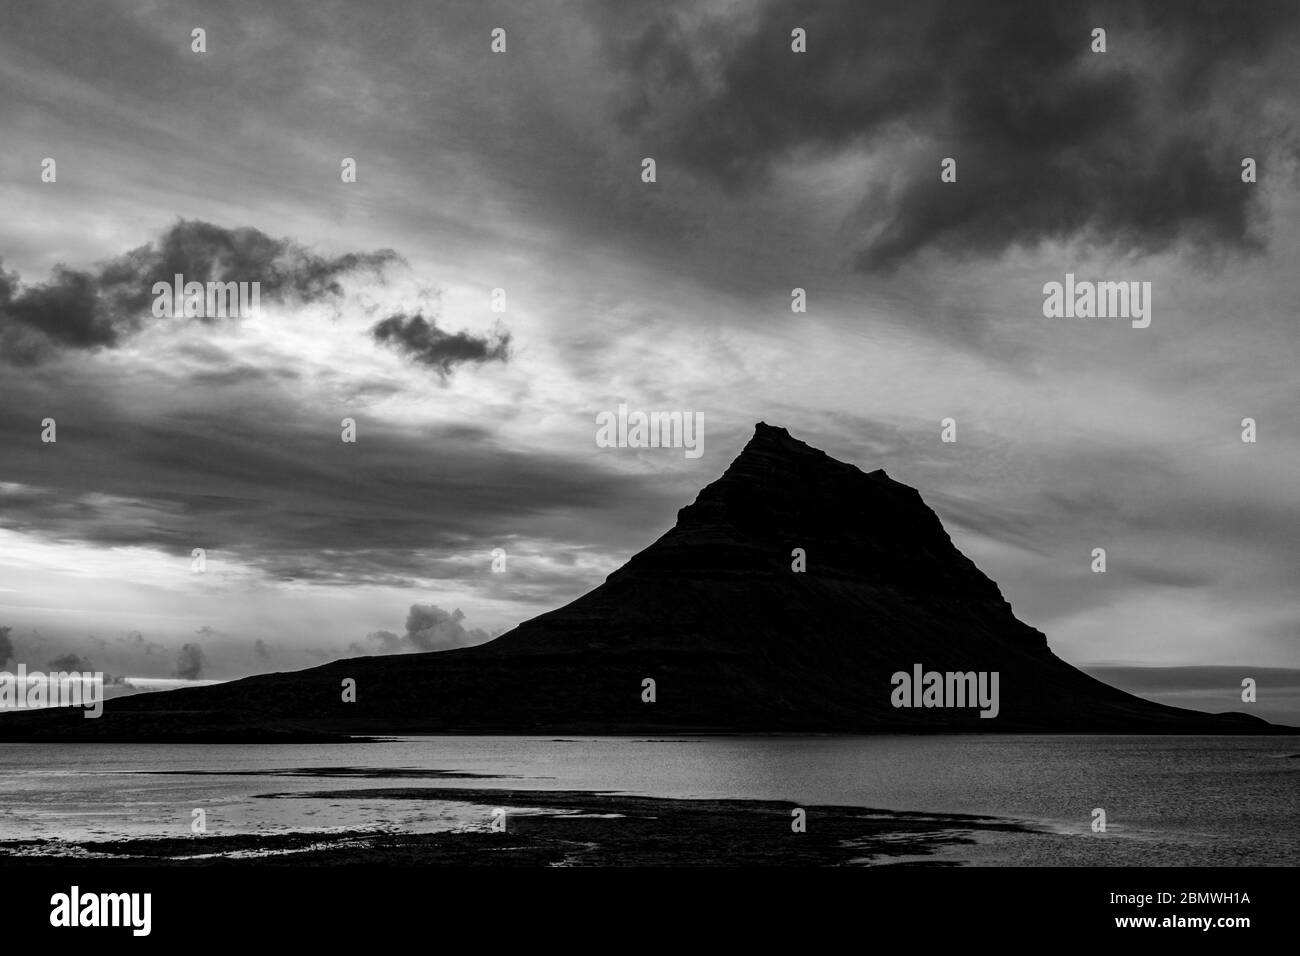 Kirkjufell, ('Church Mountain'), a free standing mountain on the north side of the Snæfellsnesnes peninsula, Iceland. Stock Photo